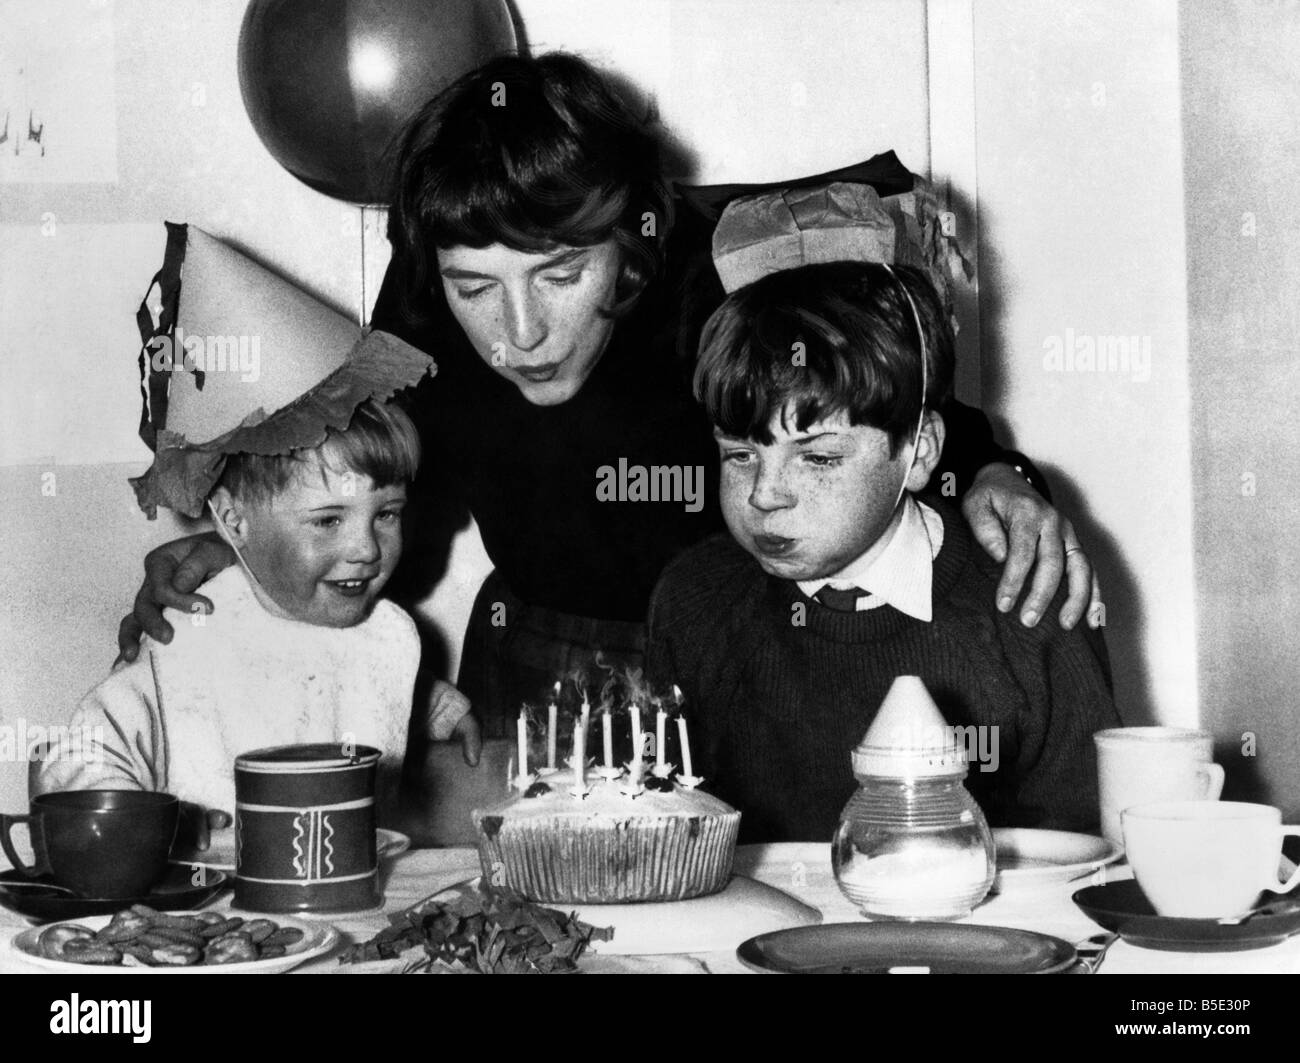 Crime A6 Murder of Michael Gregsten. ;Picture taken at home of Mrs. Janet Gregston with her two sons Anthony 3 and Simon (9) 1961. Michael Gregston was murdered by James Hanratty 1962. Stock Photo